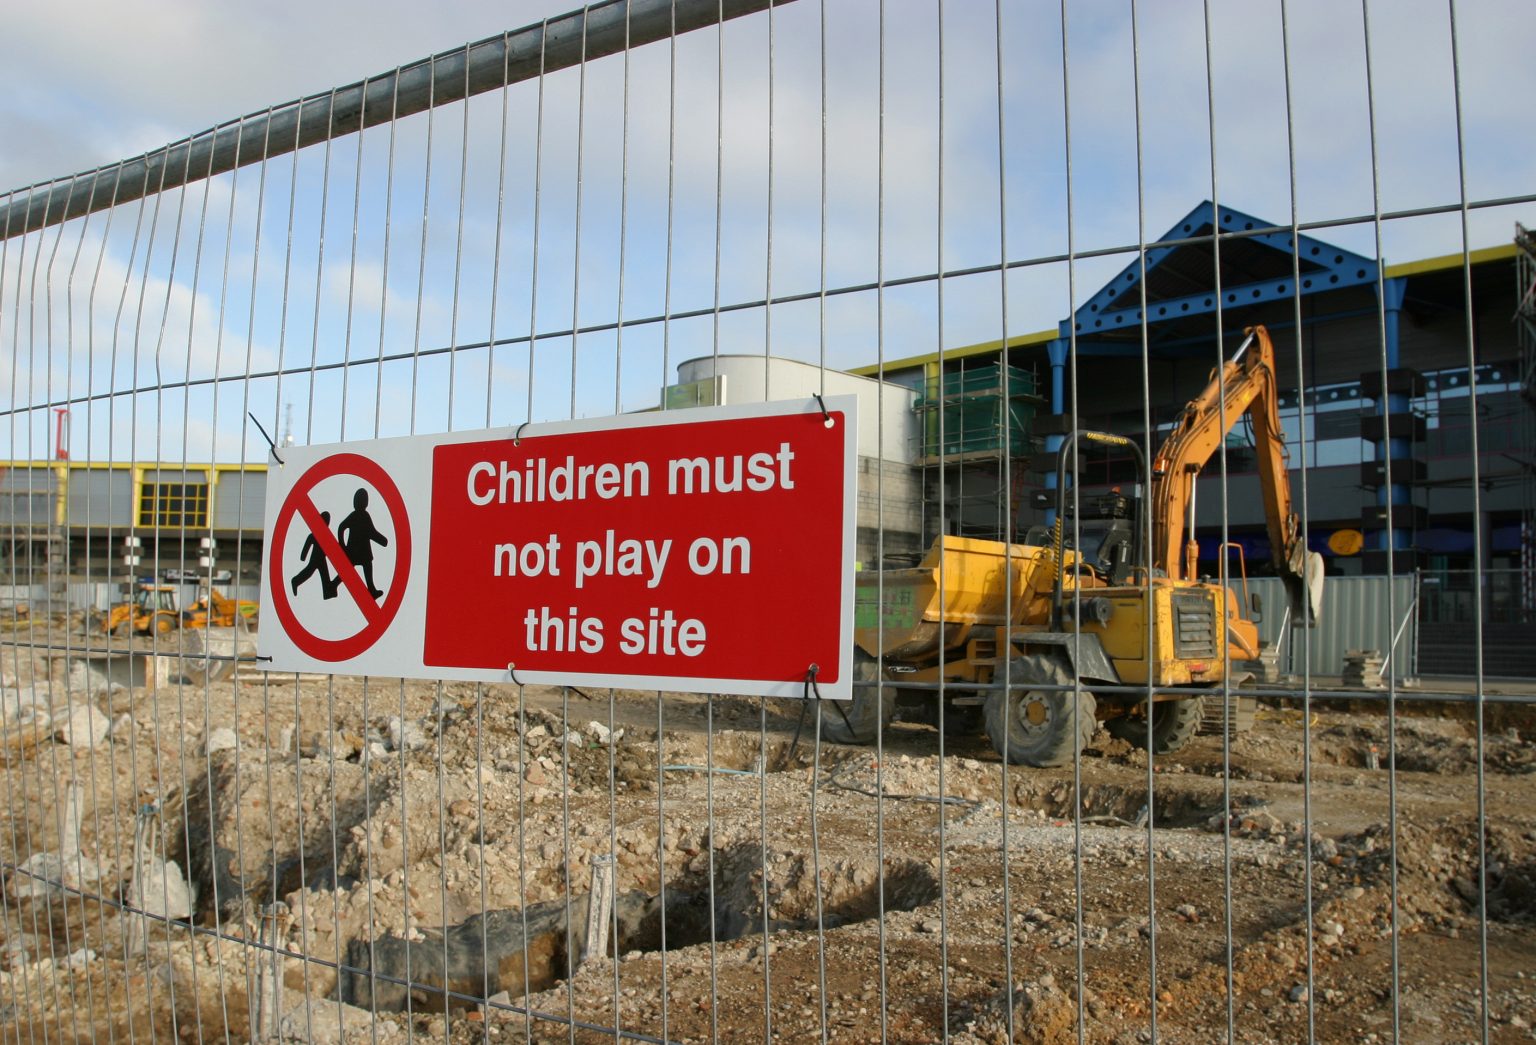 Could Your Construction Site Be an Attractive Nuisance?